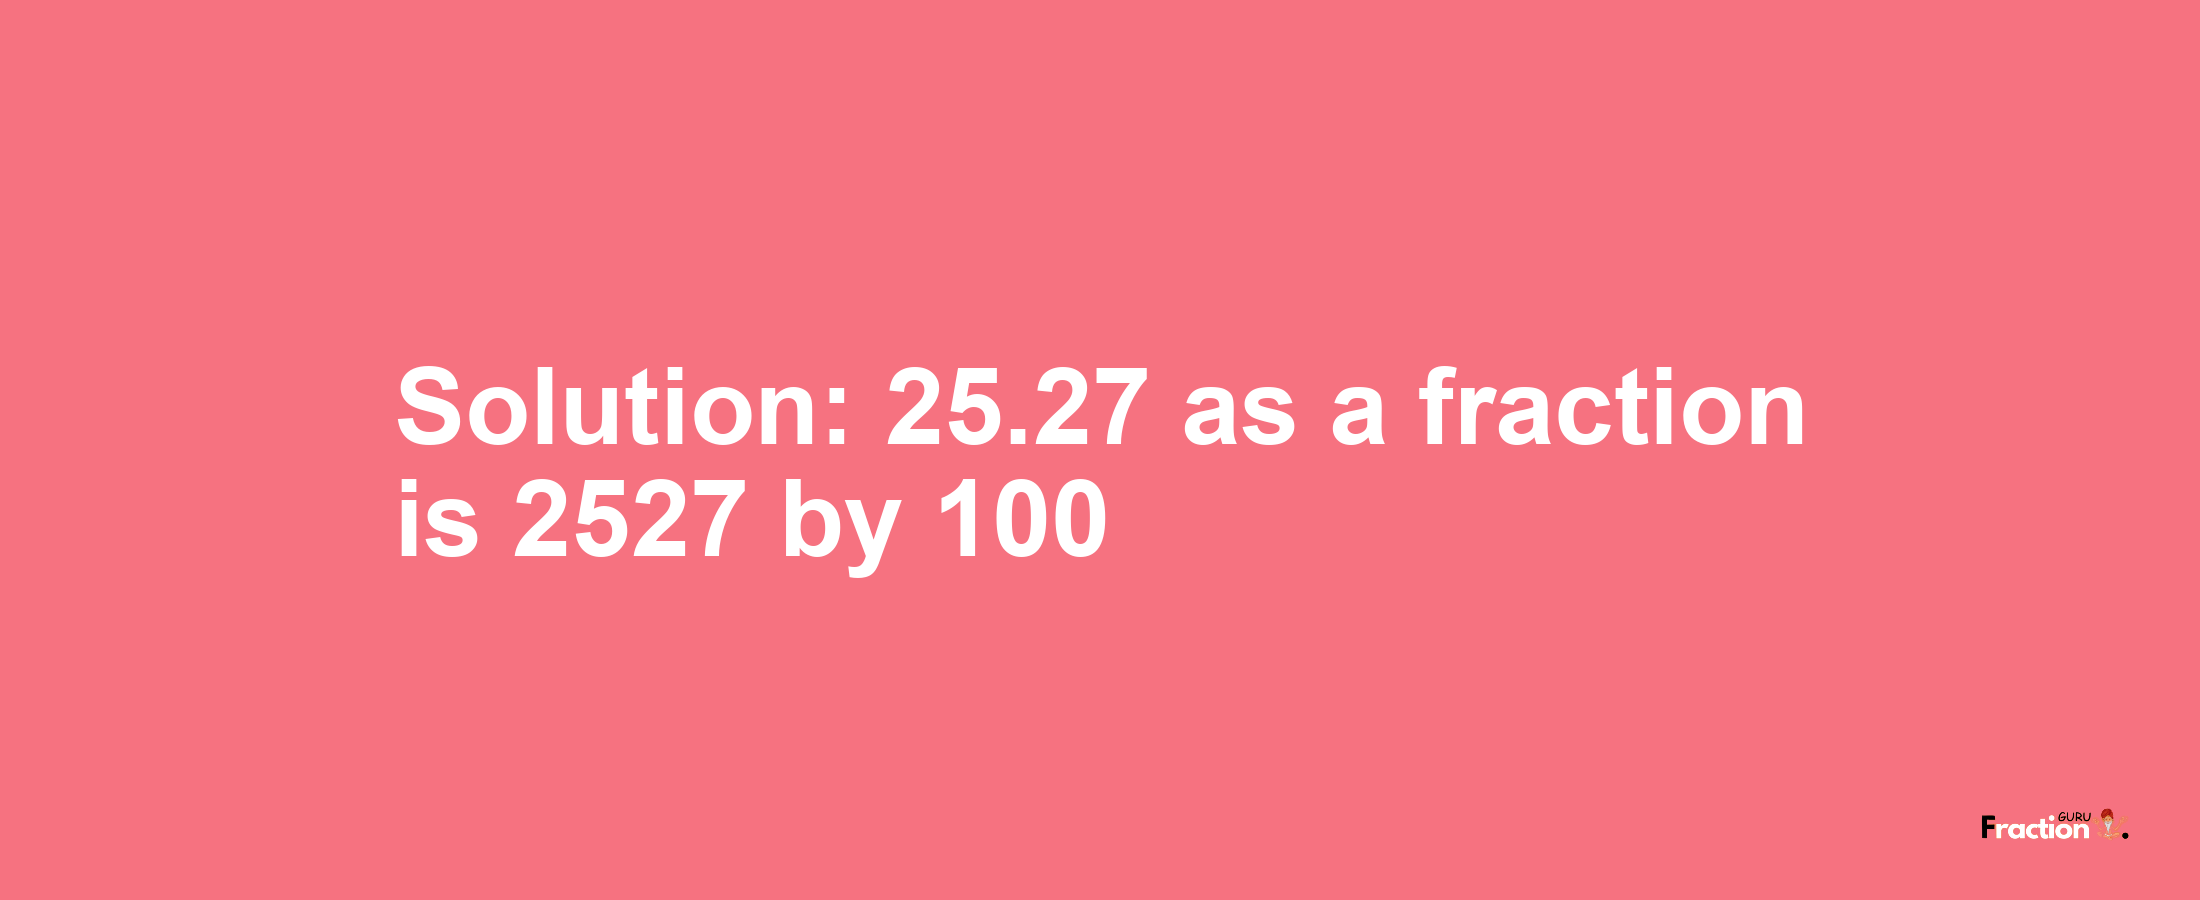 Solution:25.27 as a fraction is 2527/100